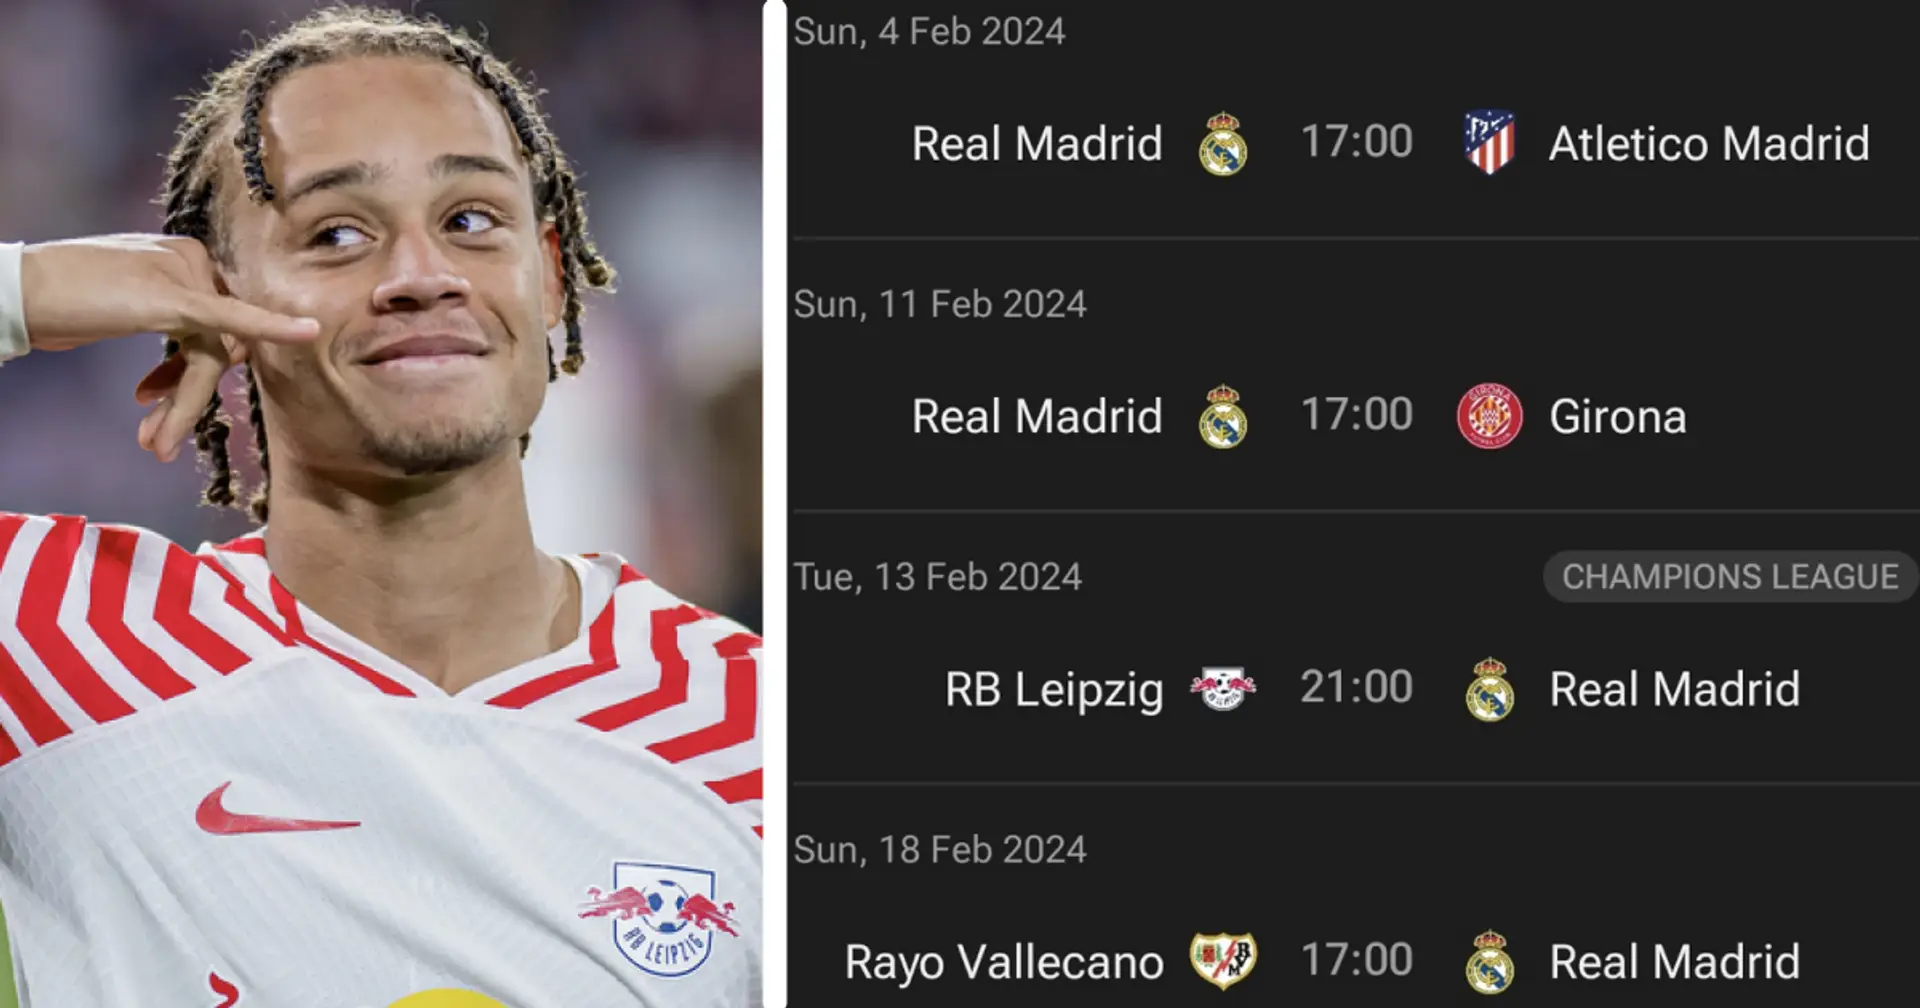 Date & time of Real Madrid's Champions League last-16 clashes confirmed – schedule looks crazy now